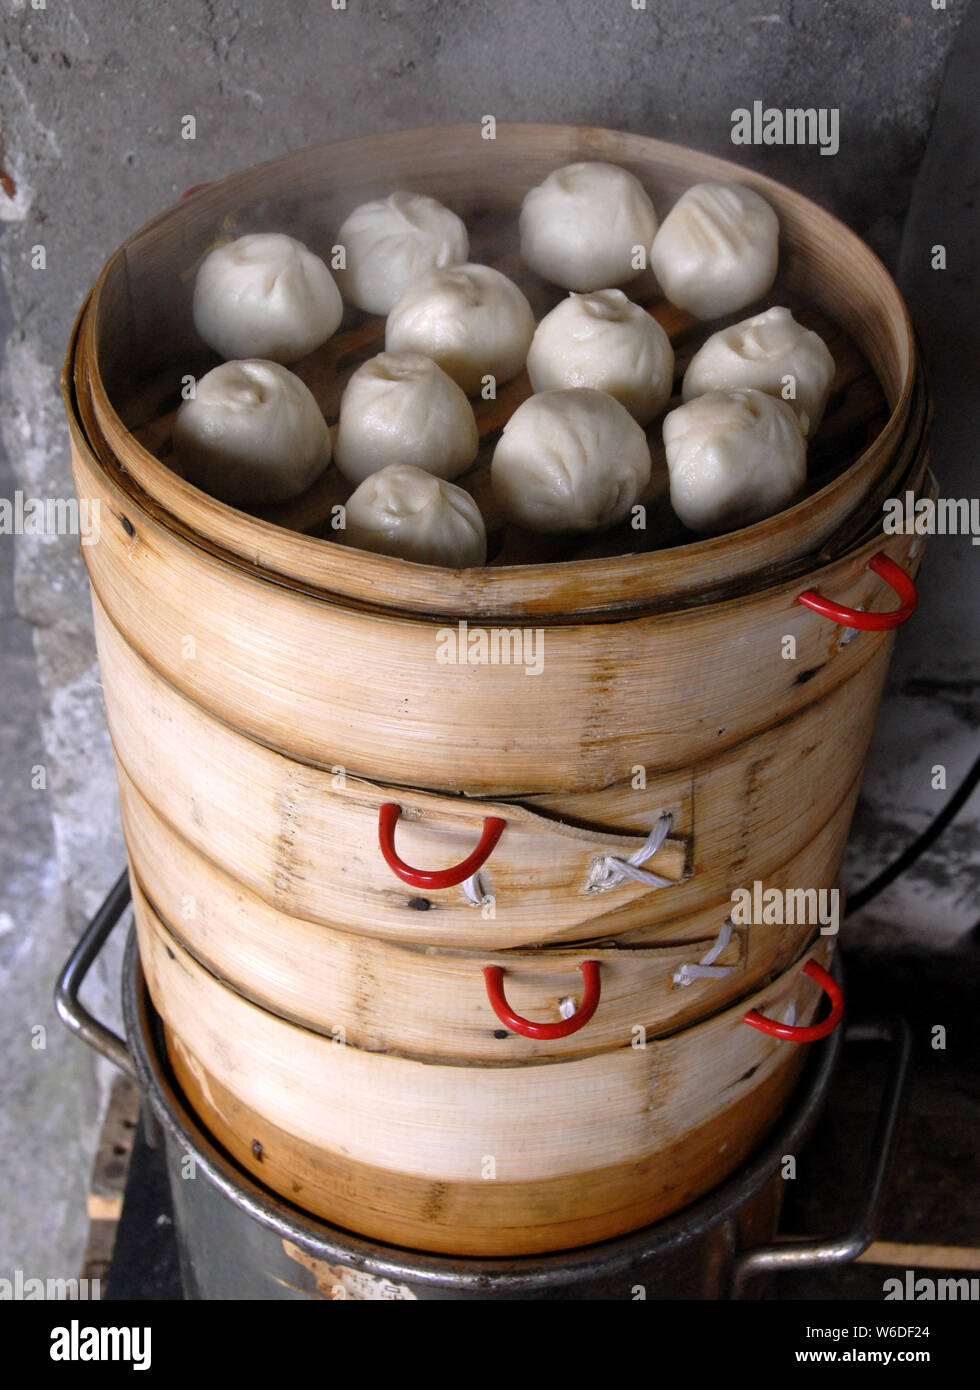 Chinese dumplings in Xitang water town near Shanghai. This is typical Chinese street food. These steamed dumplings are popular in China. Xitang, China Stock Photo